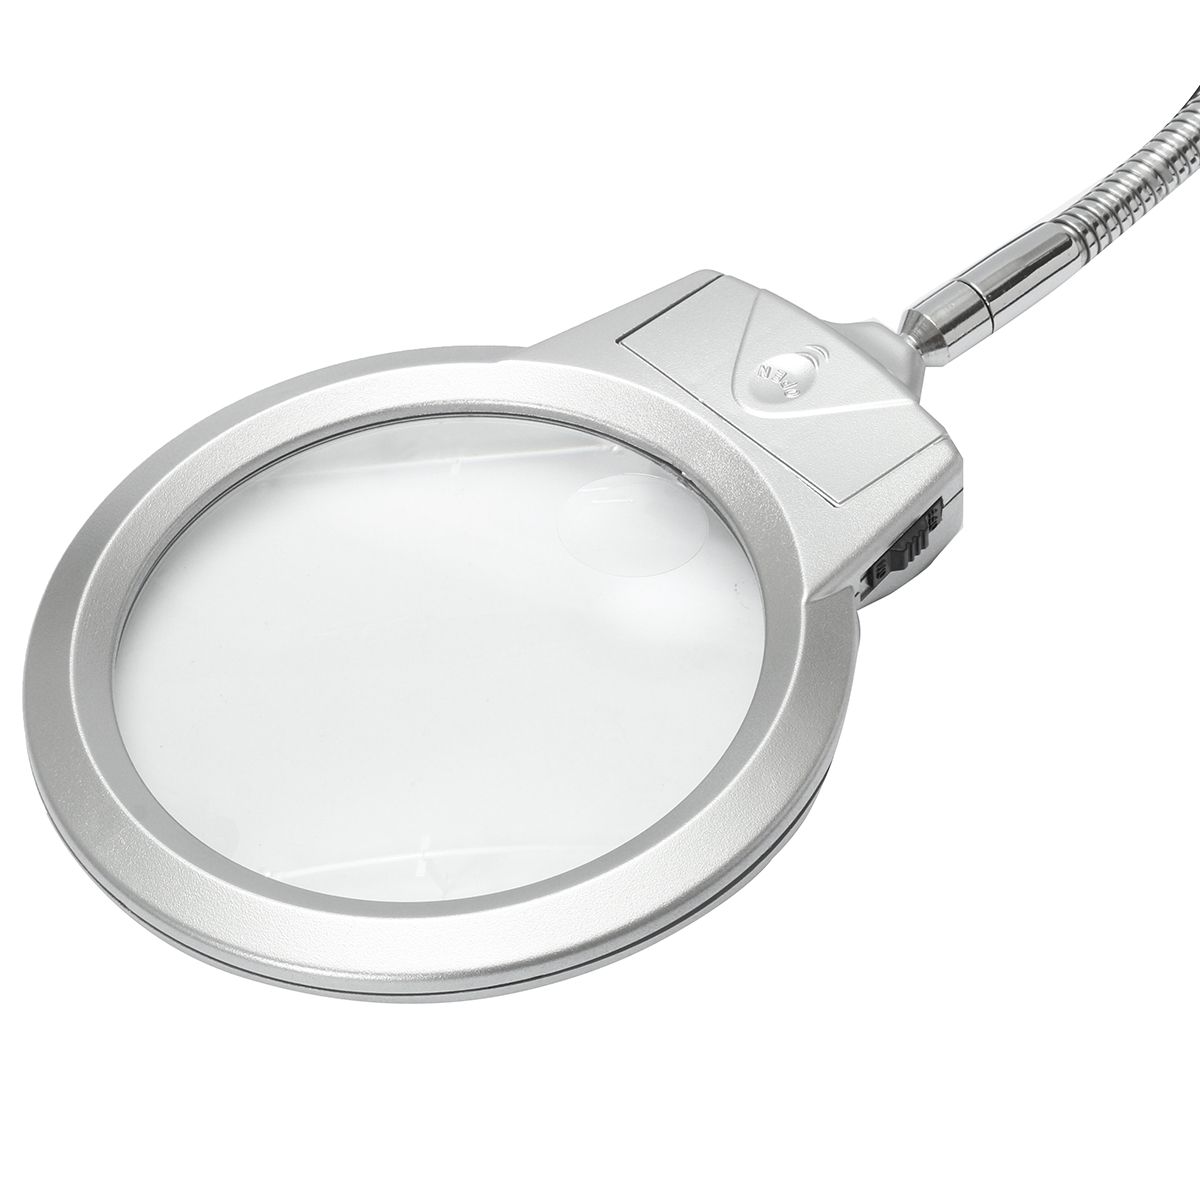 New-25-x-90MM-5-x-22MM-2-LED-Lighted-Table-Top-Desk-Magnifier-Magnifying-Glass-with-Clamp-1075605-6